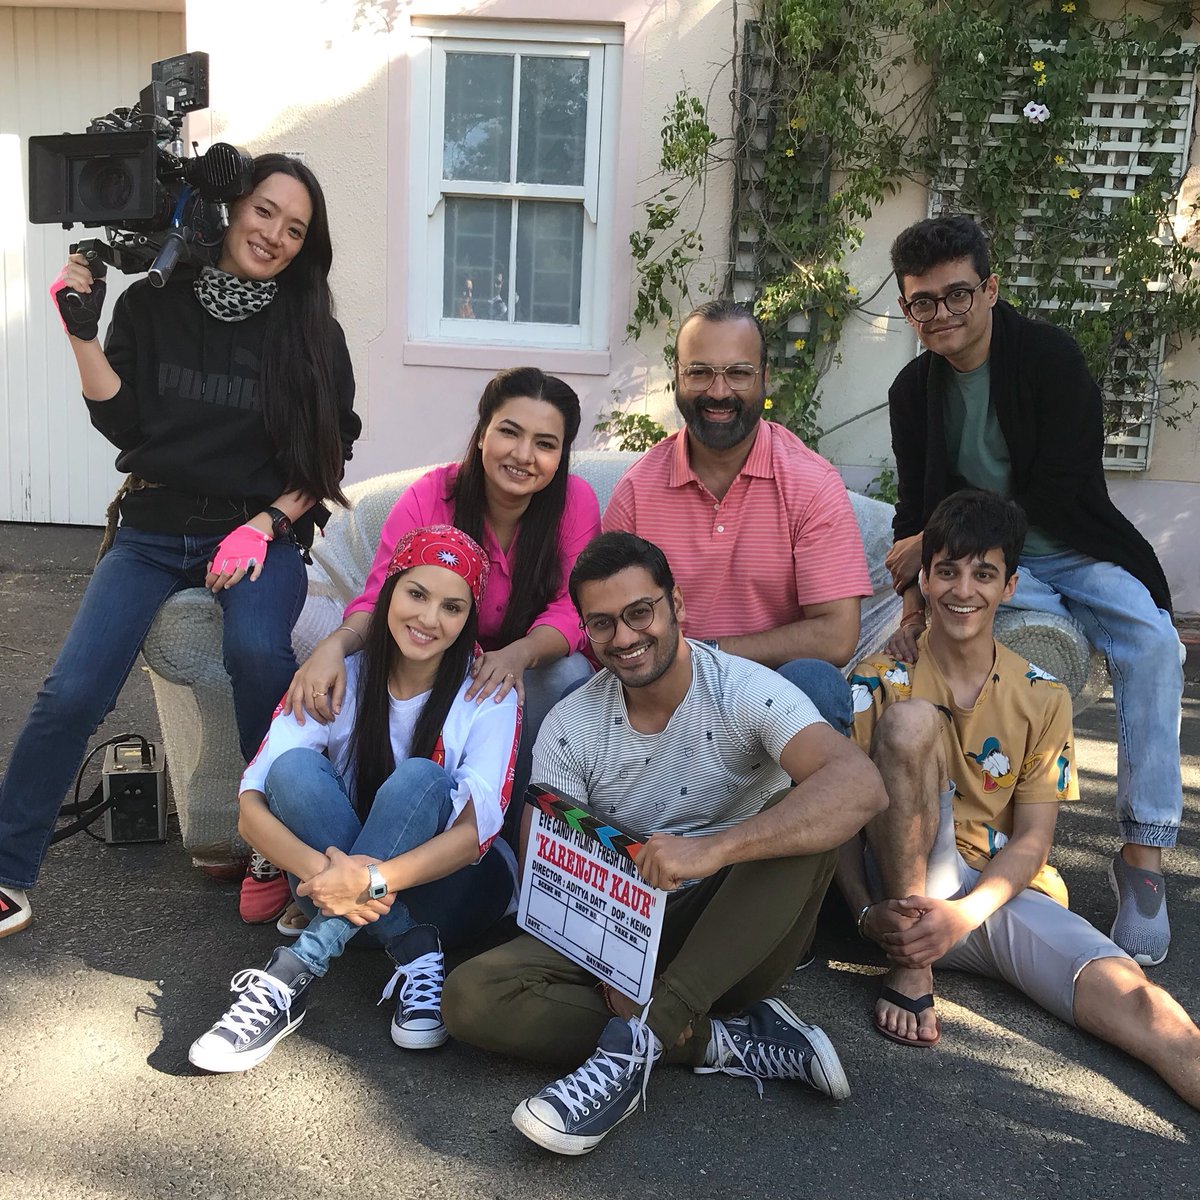 Excited to announce our upcoming show on @ZEE5India #karenjitkaur with @SunnyLeone @grushakapoor @karamvirlamba 
This one is going to be epic with great direction by @ADITYADATT and produced by @NamahEdge 
#ZEE5Originals